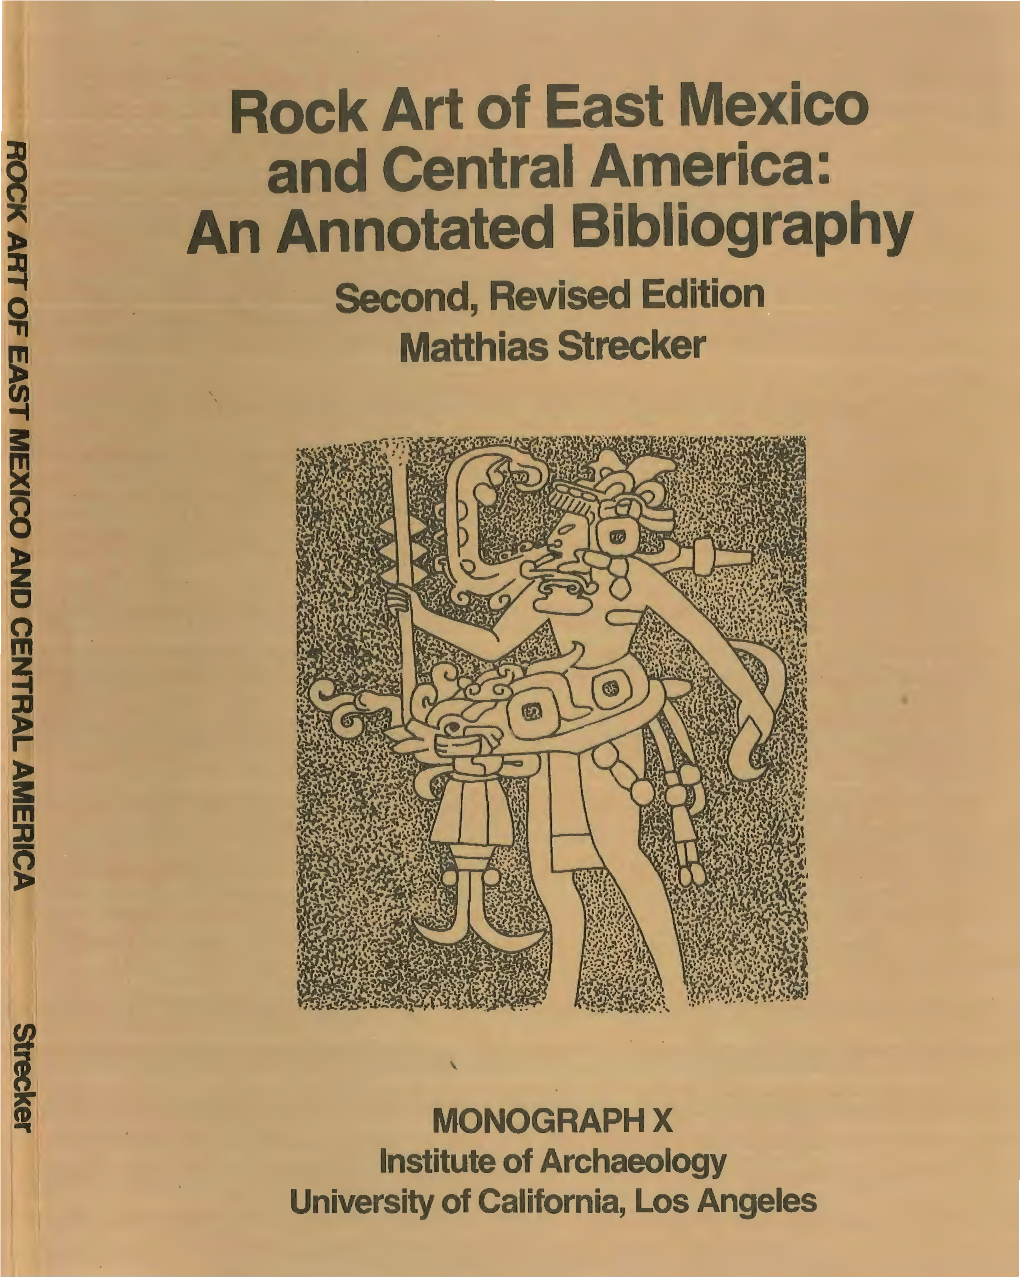 Rock Art of East Mexico and Central America: an Annotated Bibliography Second, Revised Edition Matthias Strecker